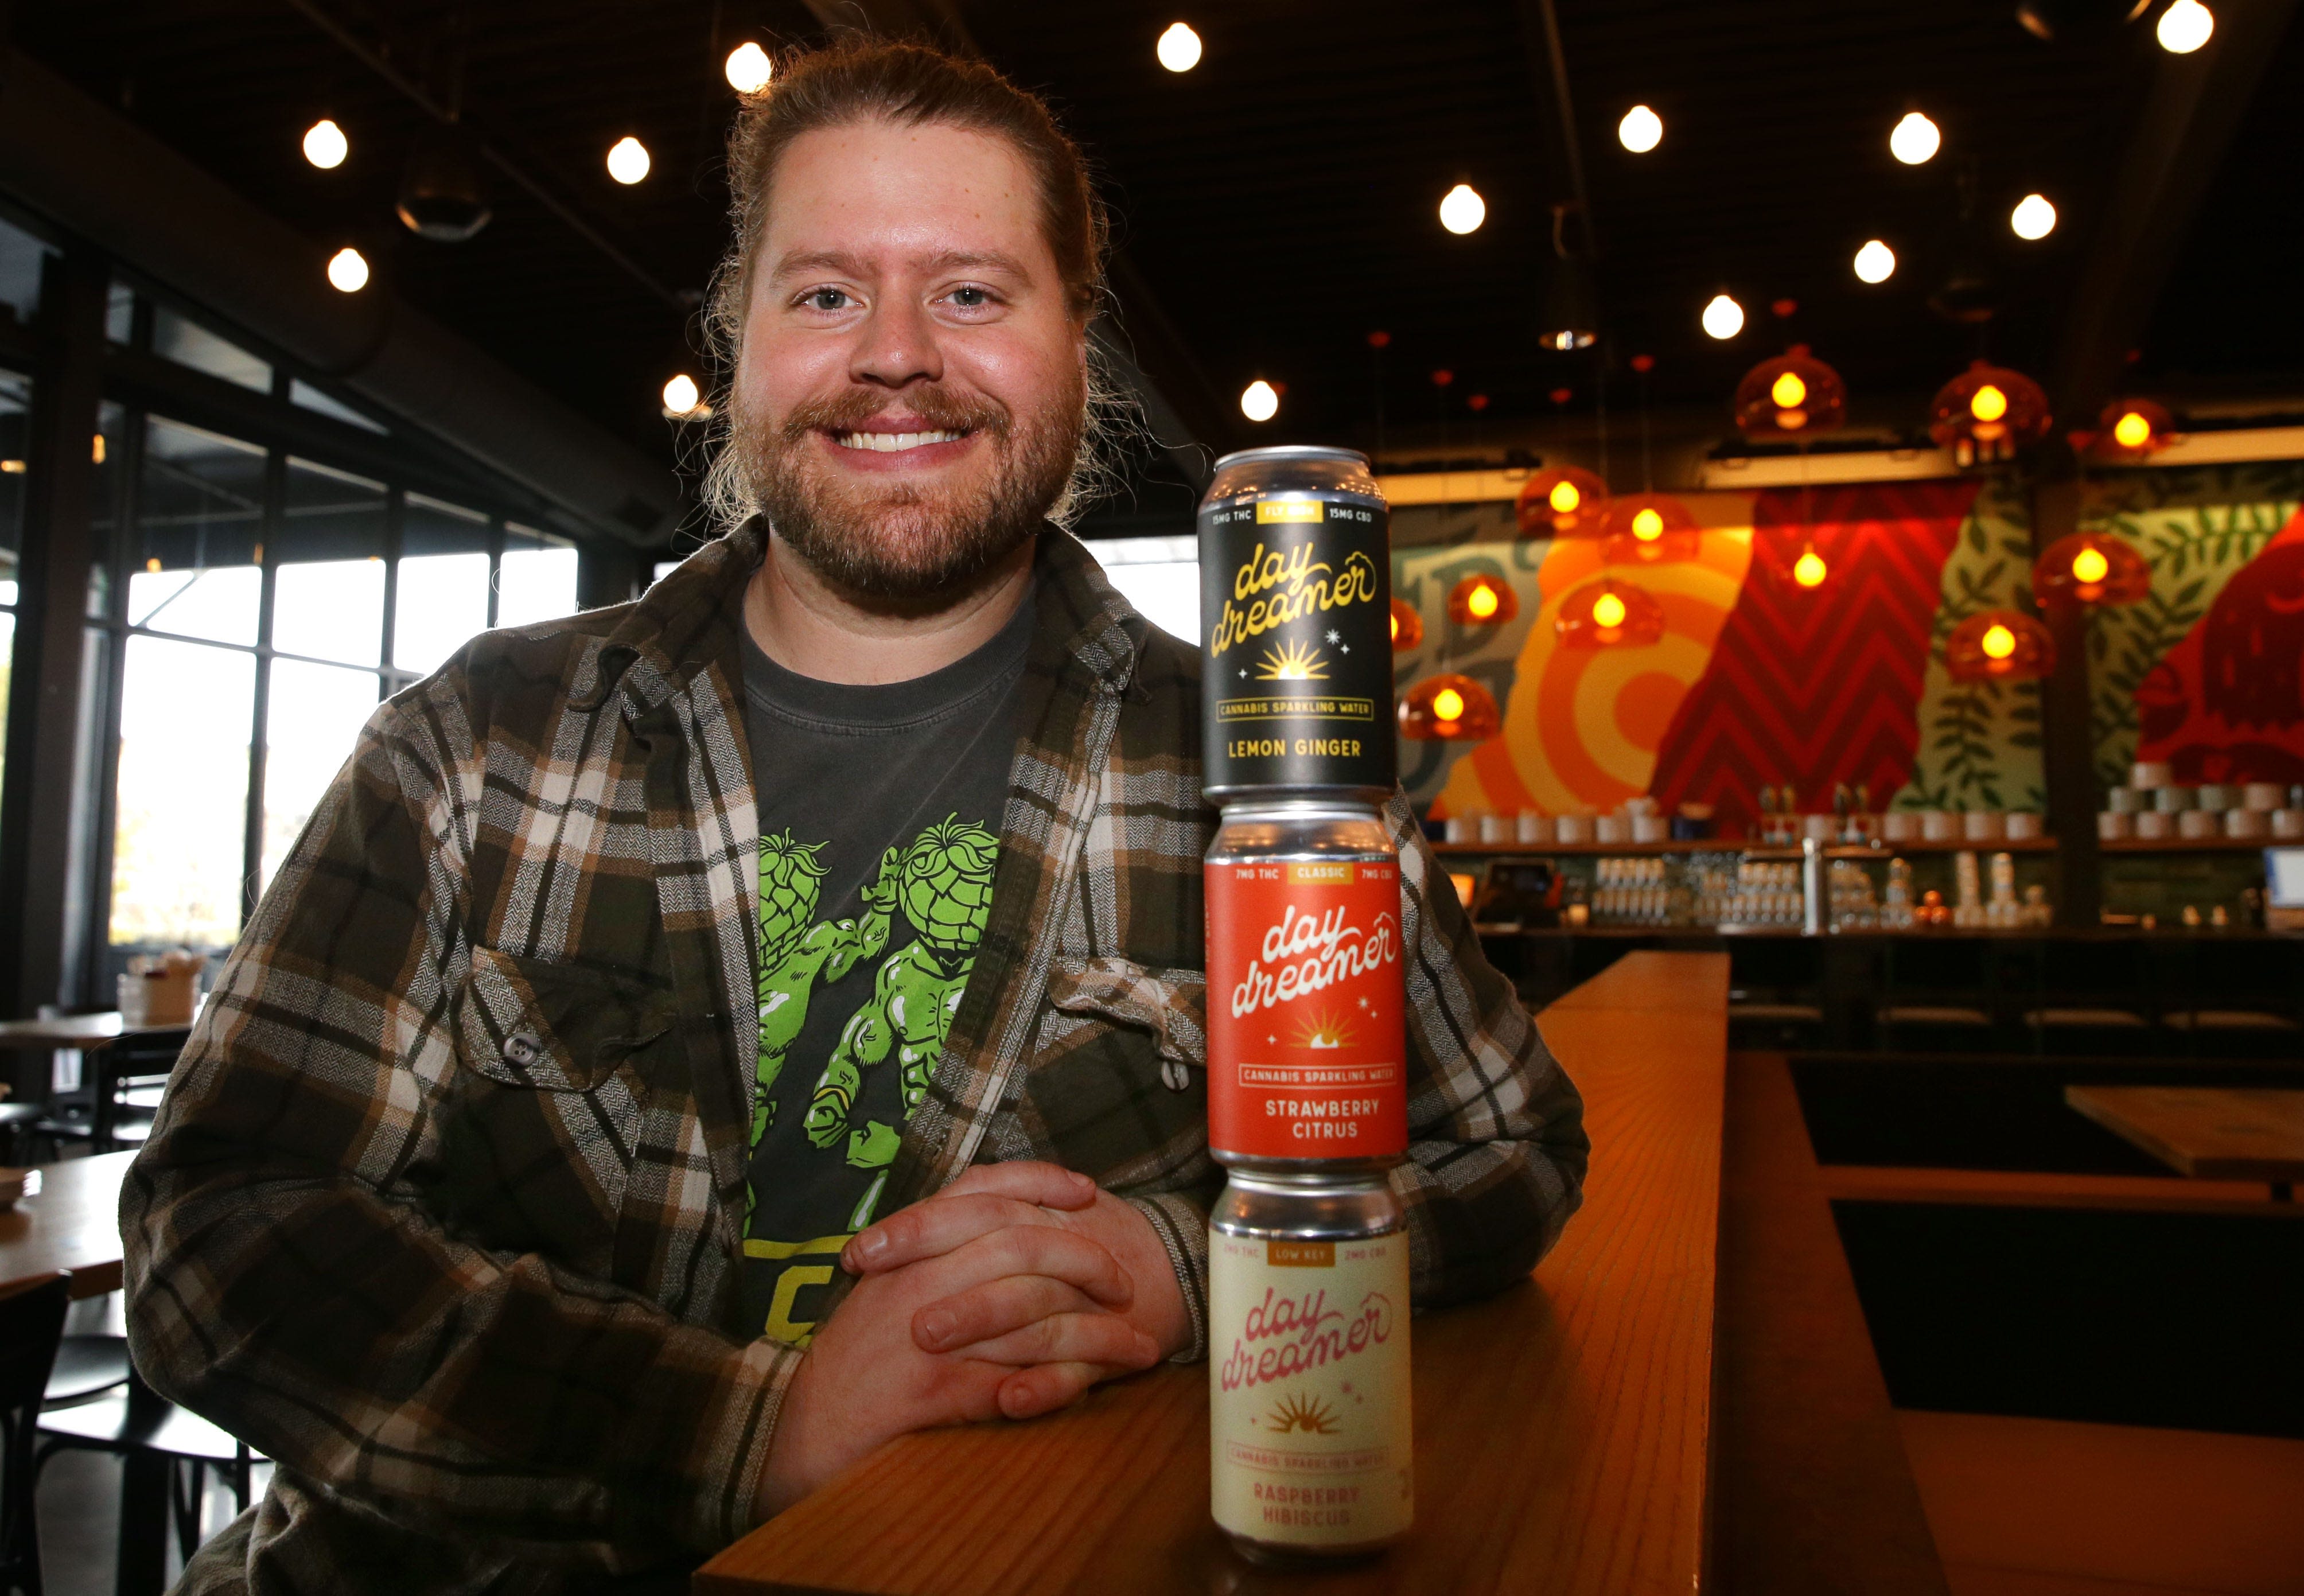 Iowa brewers say Iowa regulation of THC products helpful, though imperfect